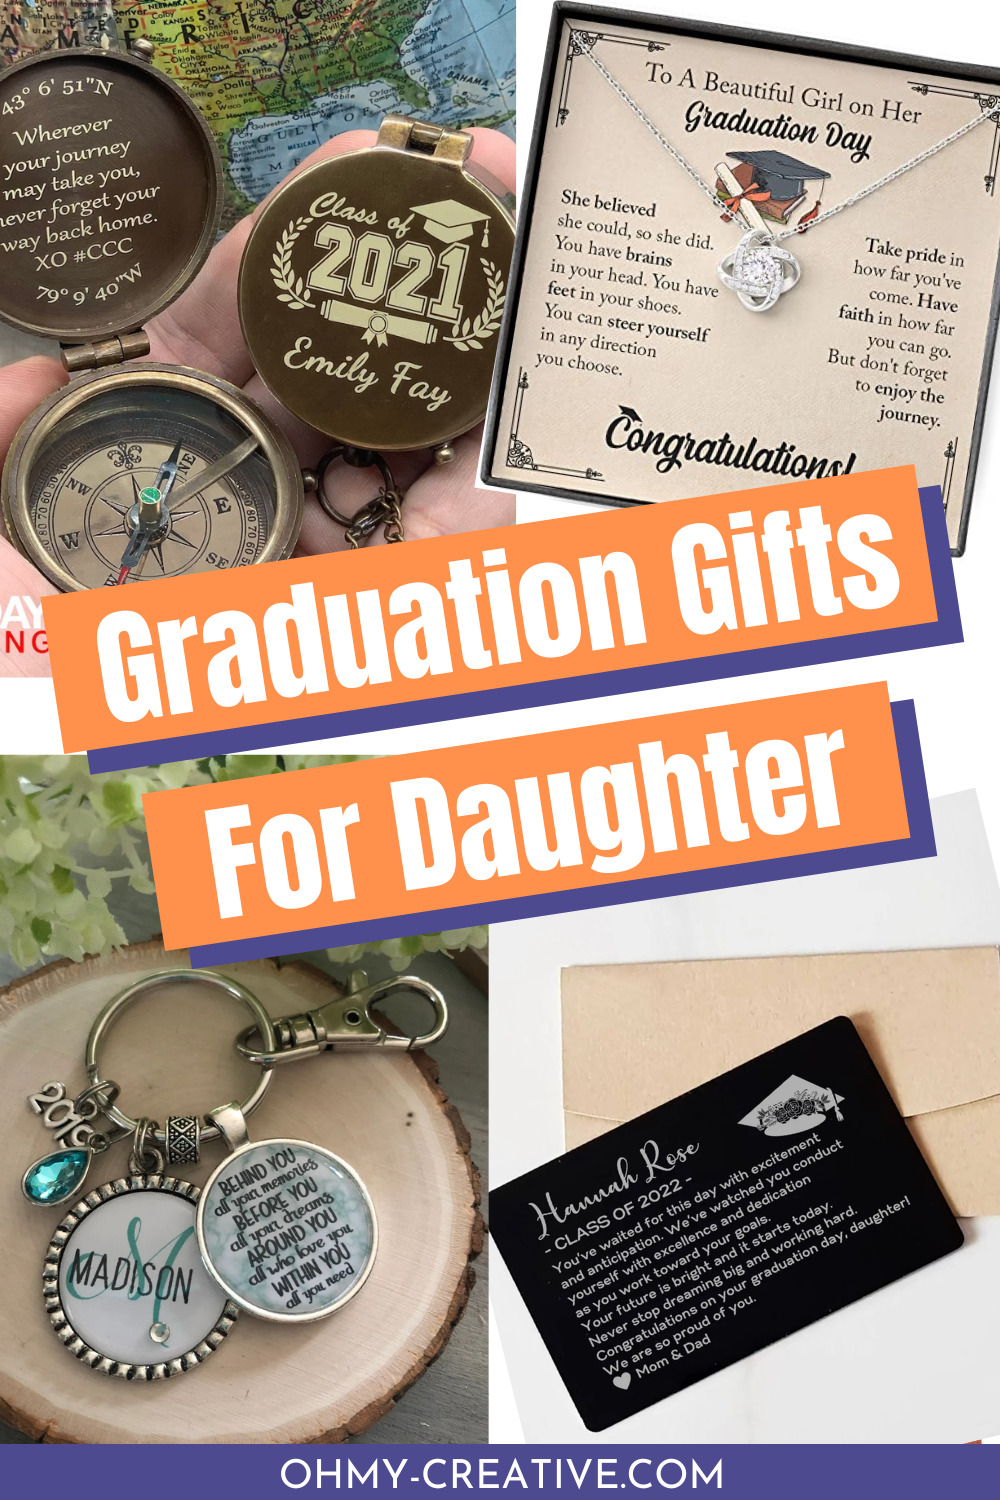 Graduation Graduation Gifts for Her-Behind You All Your Memories Dreams Who Love You Need,Inspirational Gifts for Women,Personalized Encouragement Gift for Her Inspirational Makeupbag,Congratulations